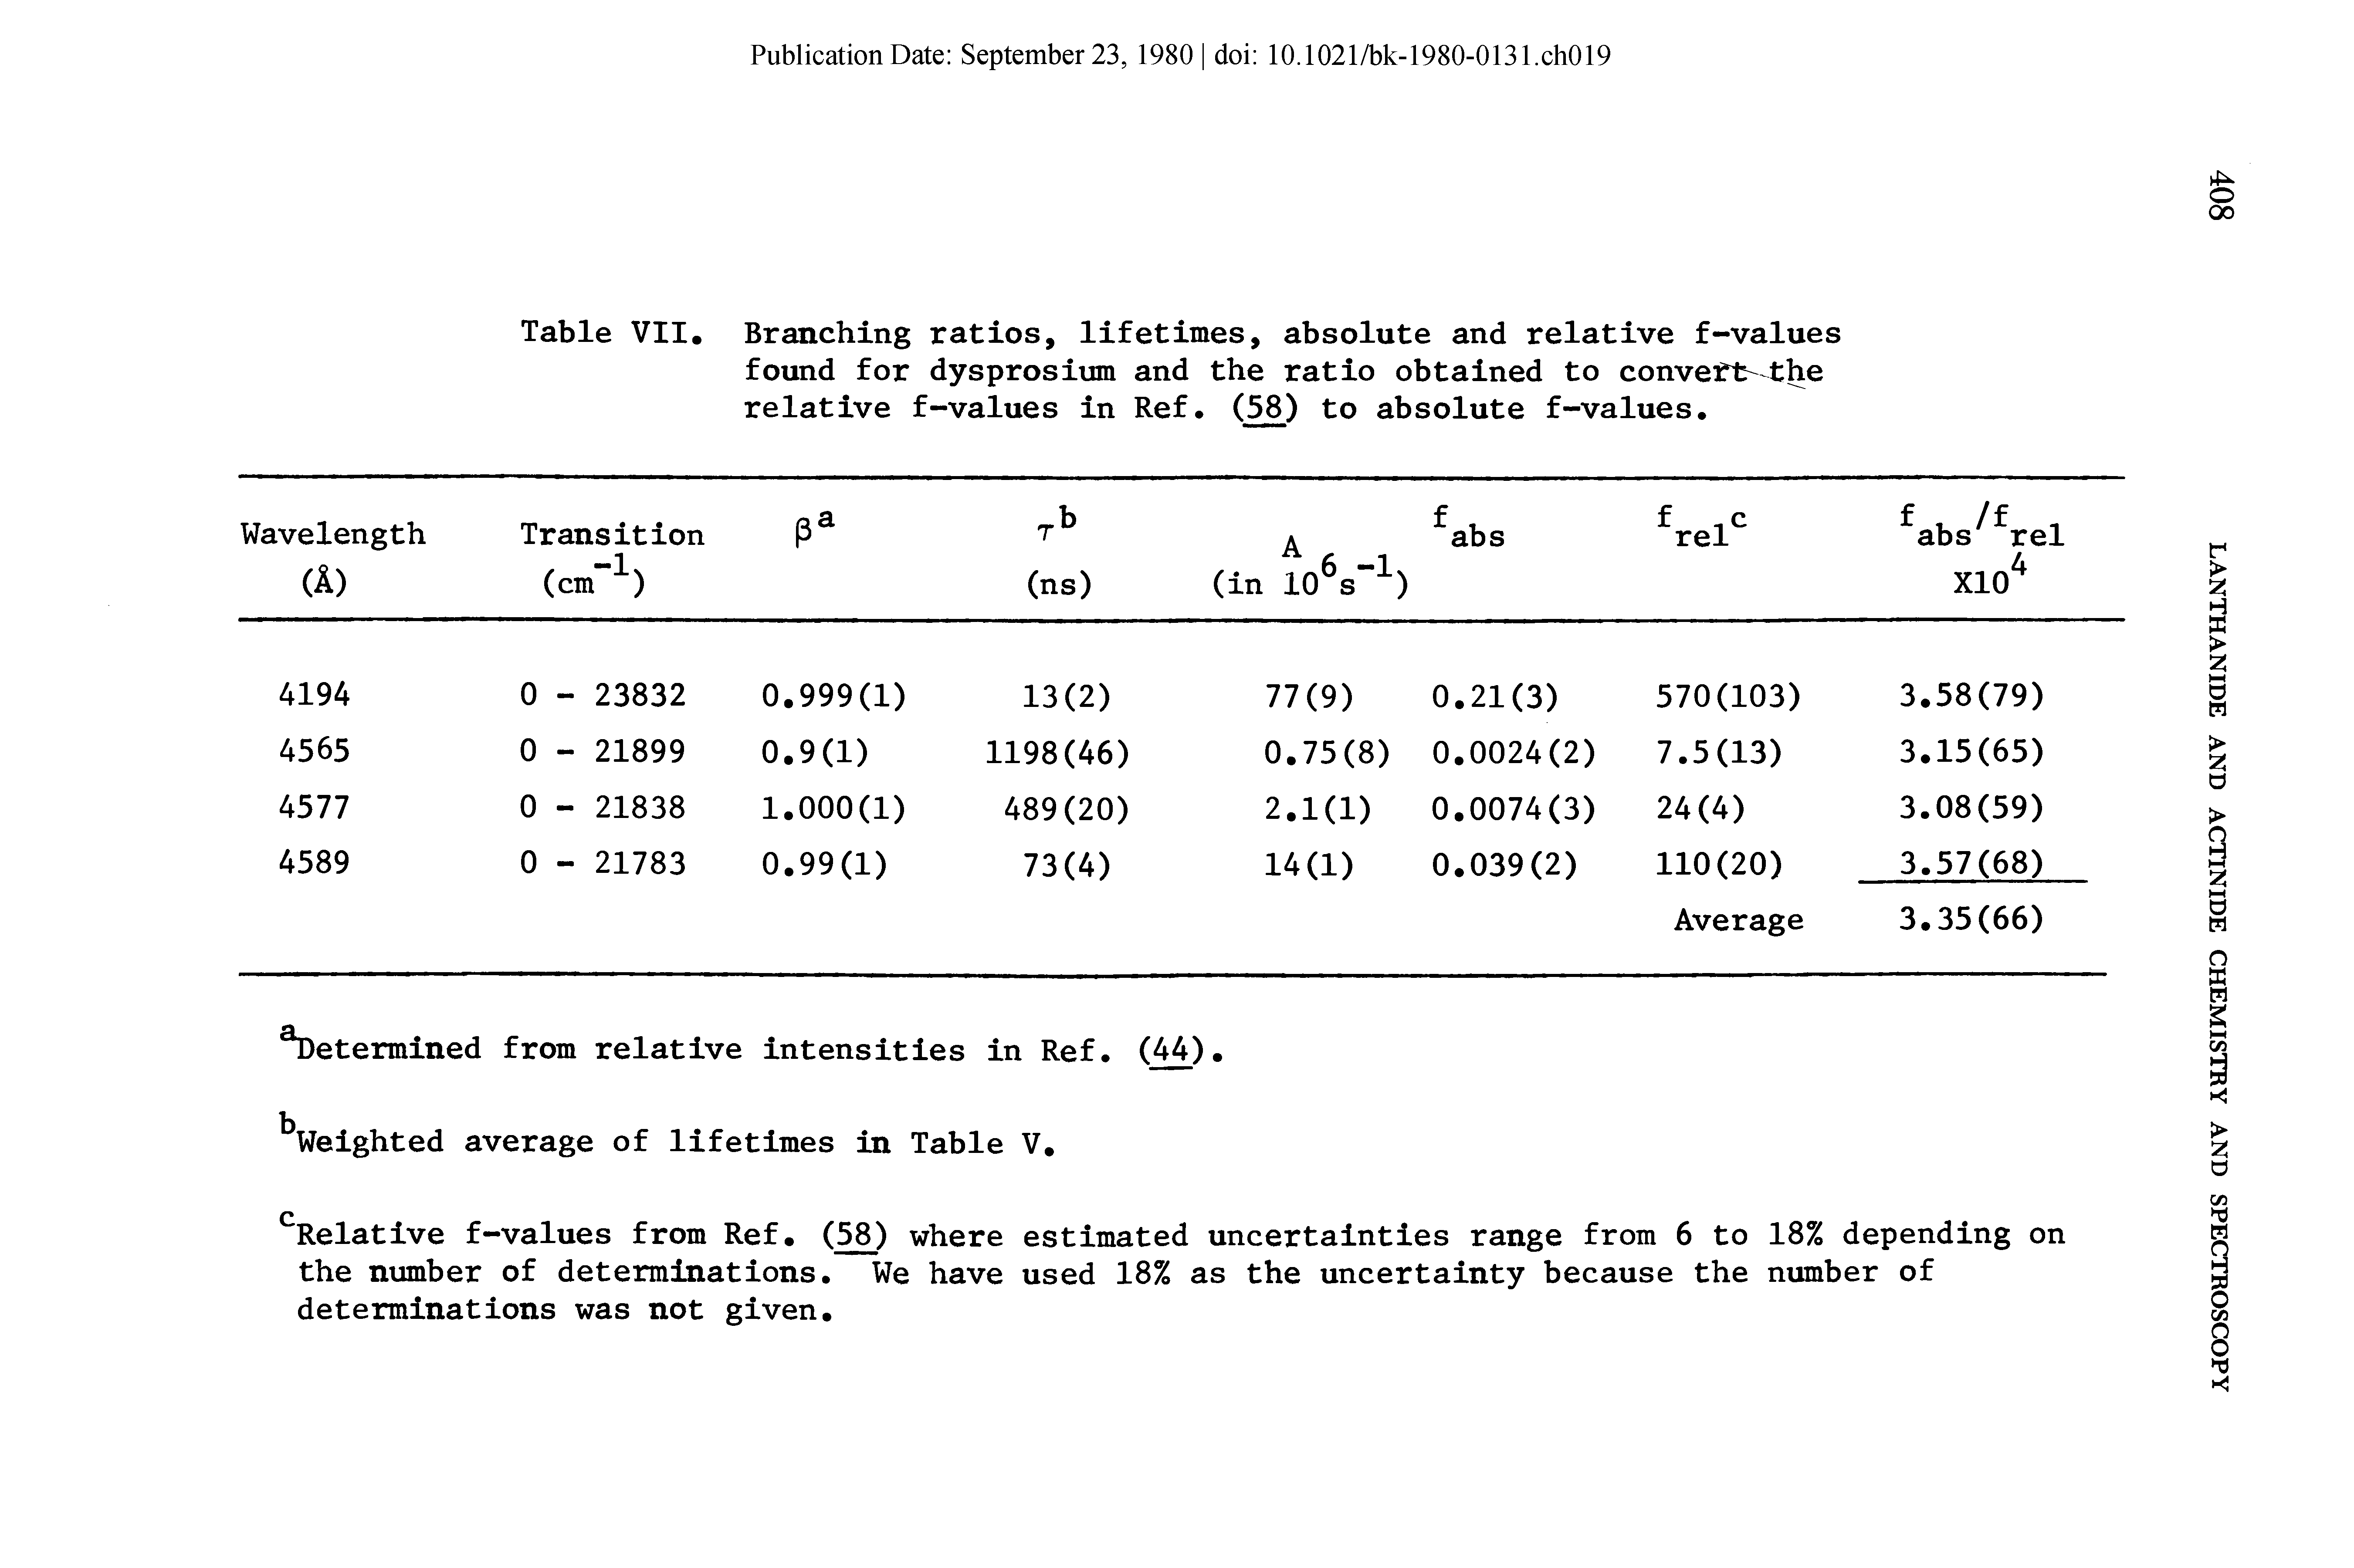 Table VII. Branching ratios, lifetimes, absolute and relative f-values found for dysprosium and the ratio obtained to conve "t- the relative f-values in Ref. (58) to absolute f-values.